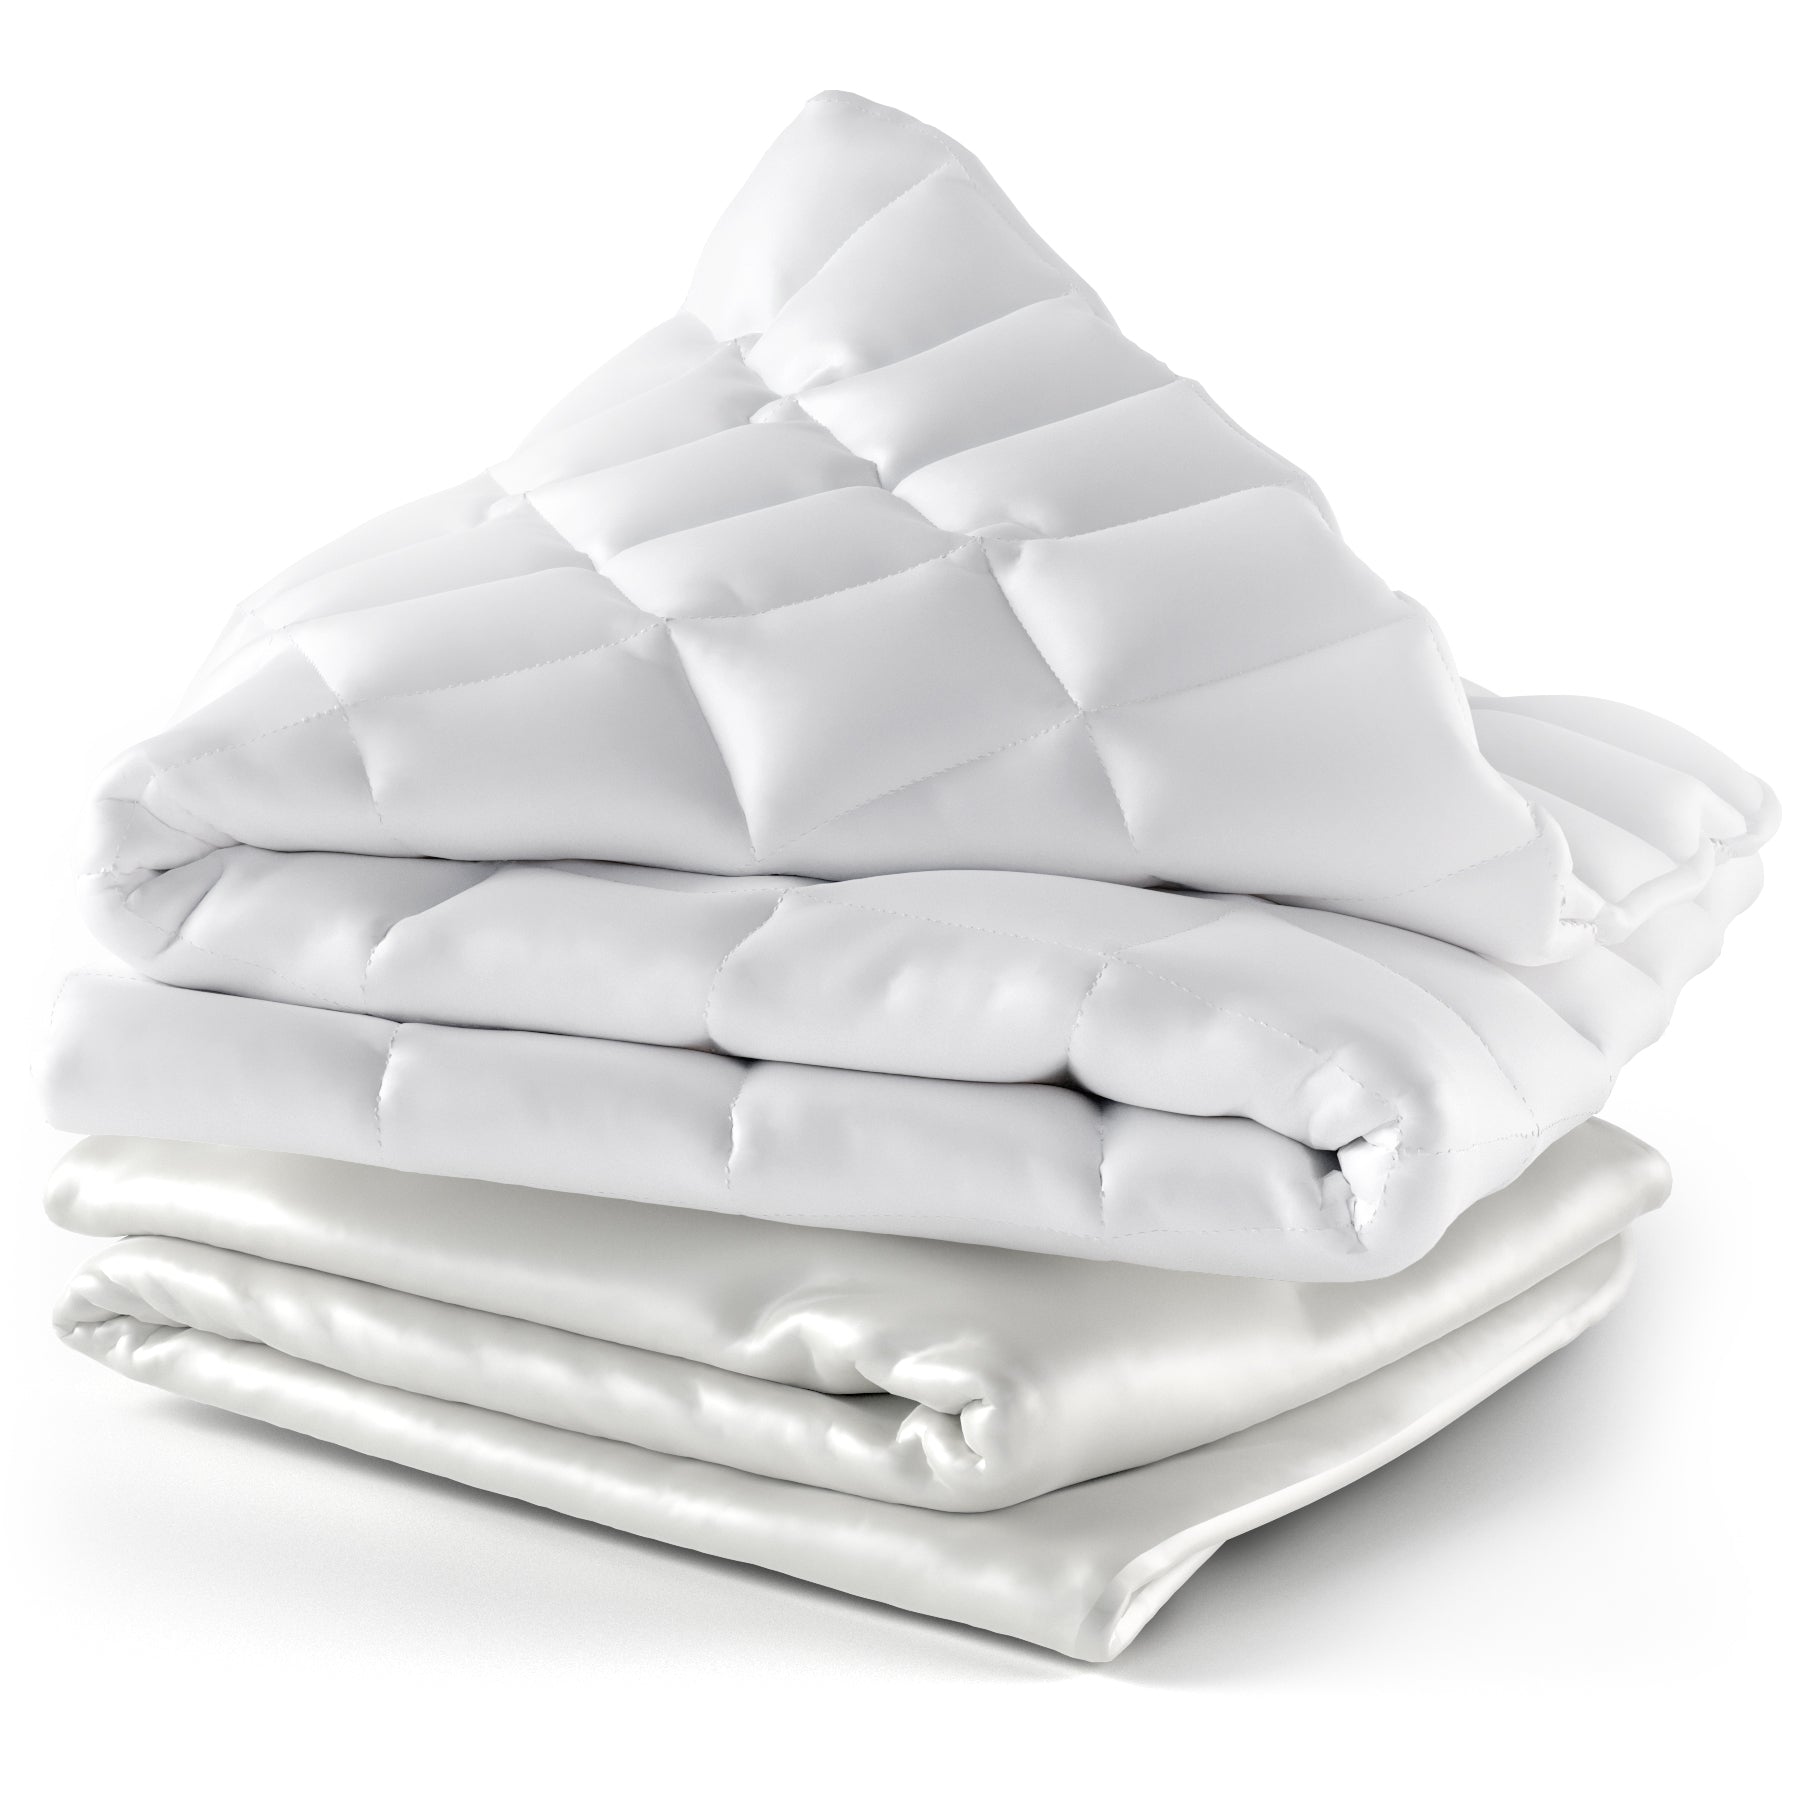 Bamboo Weighted Blanket - PV1 - Large / 8KG Size - White